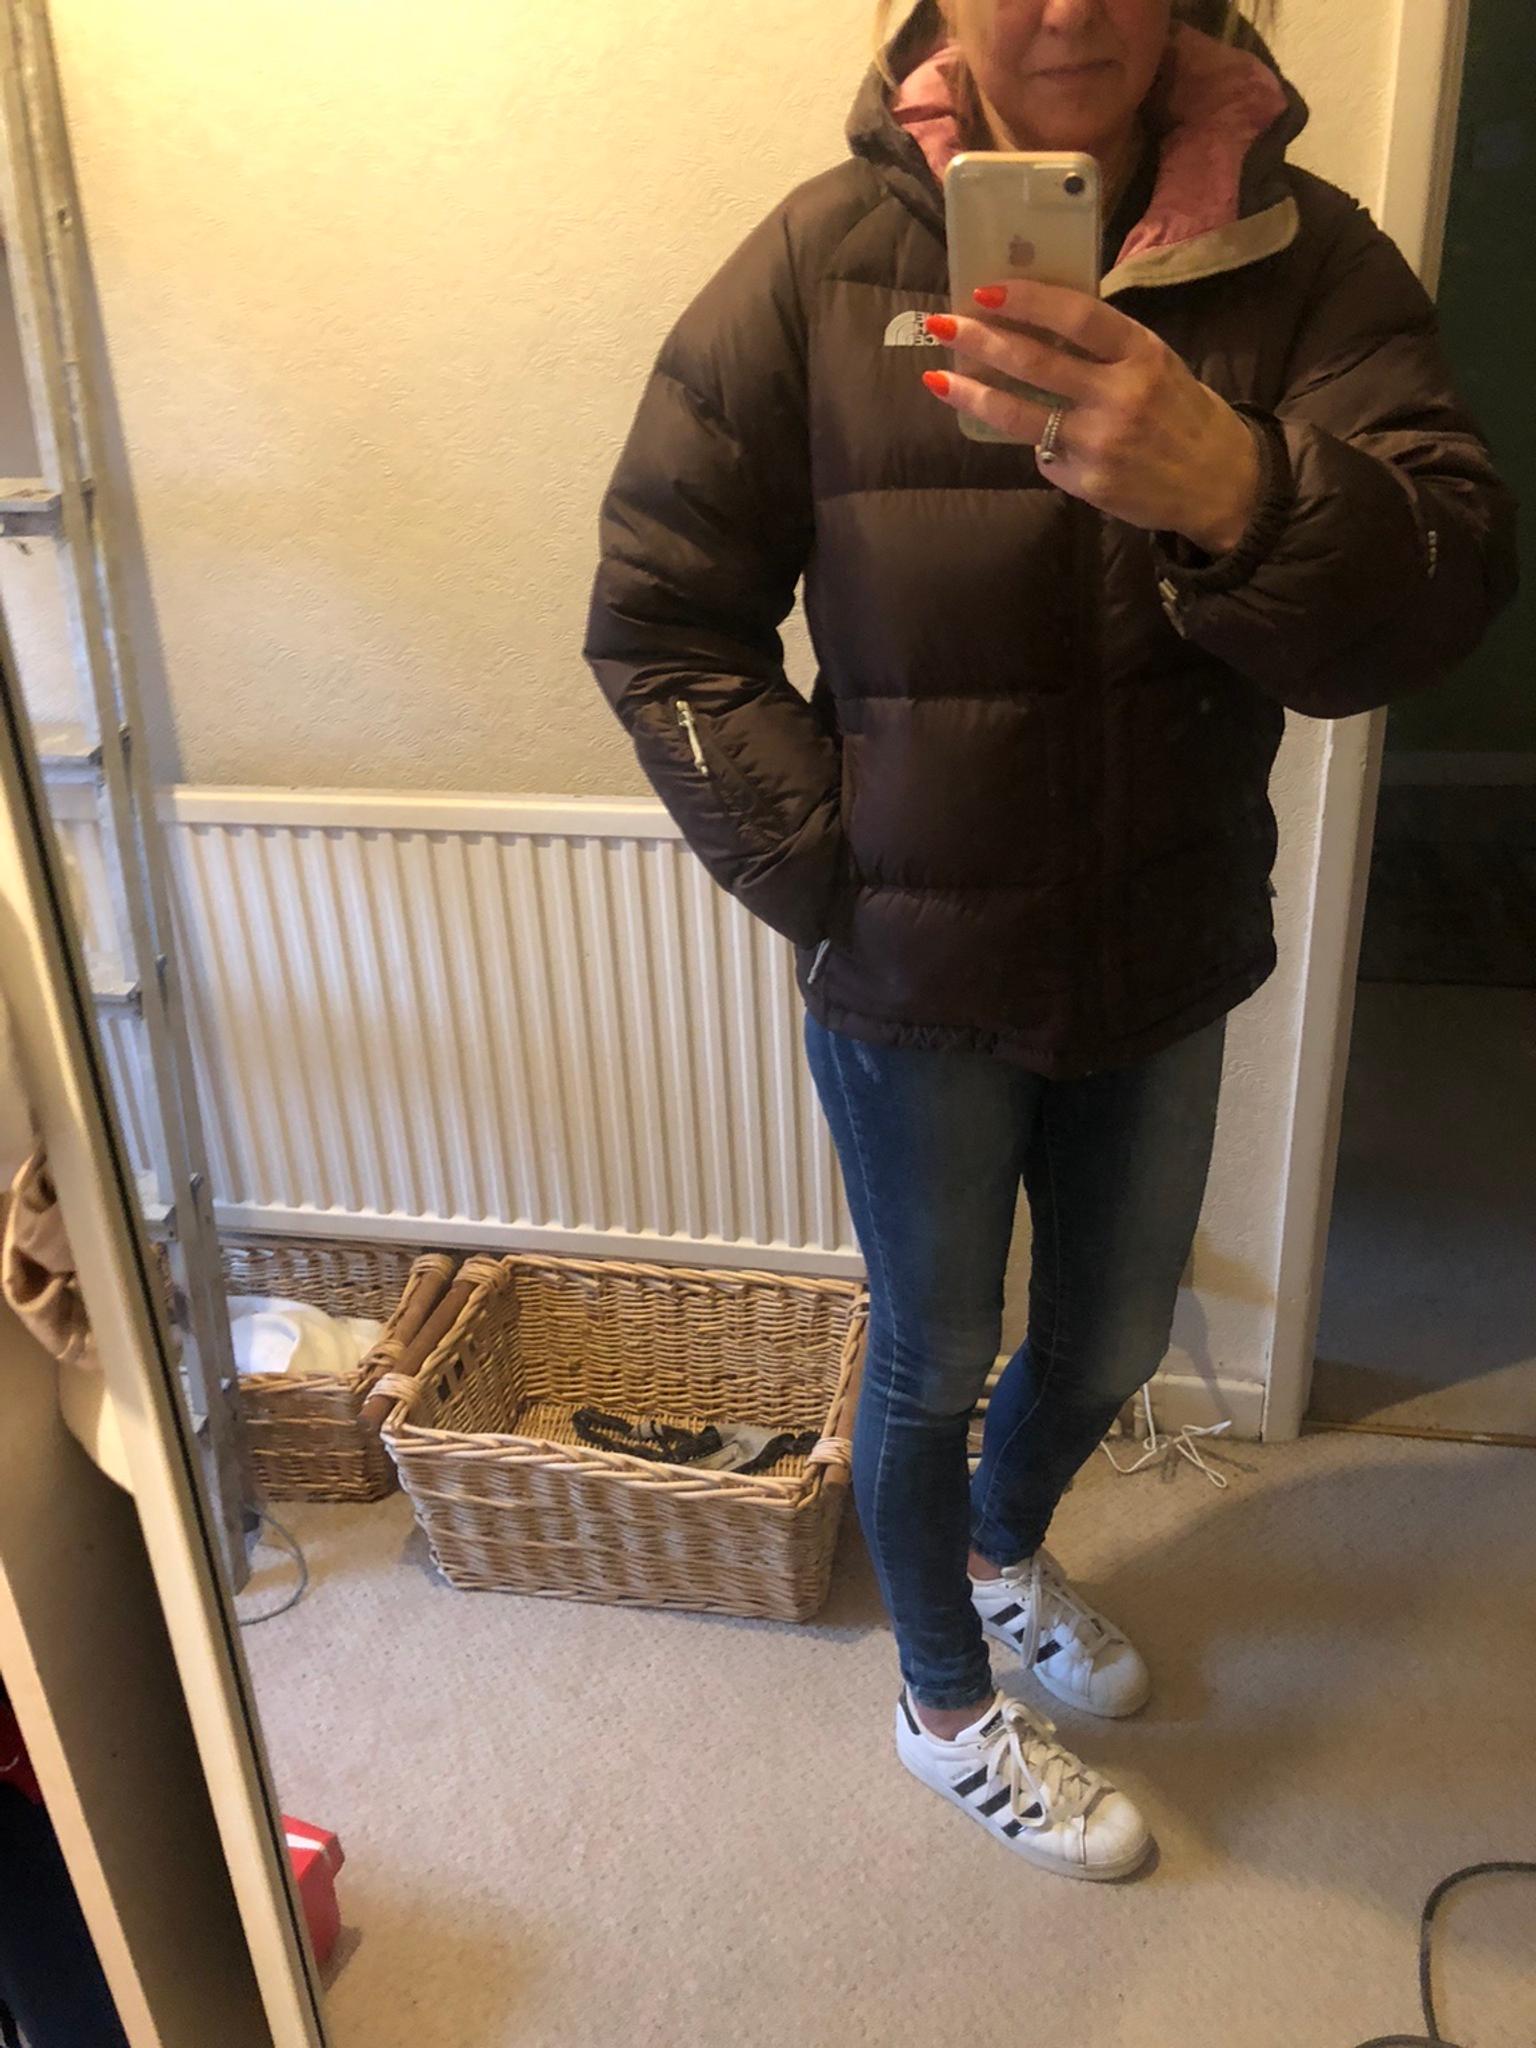 Brown 700 North Face Puffer Jacket In Pr7 Chorley For 59 00 For Sale Shpock